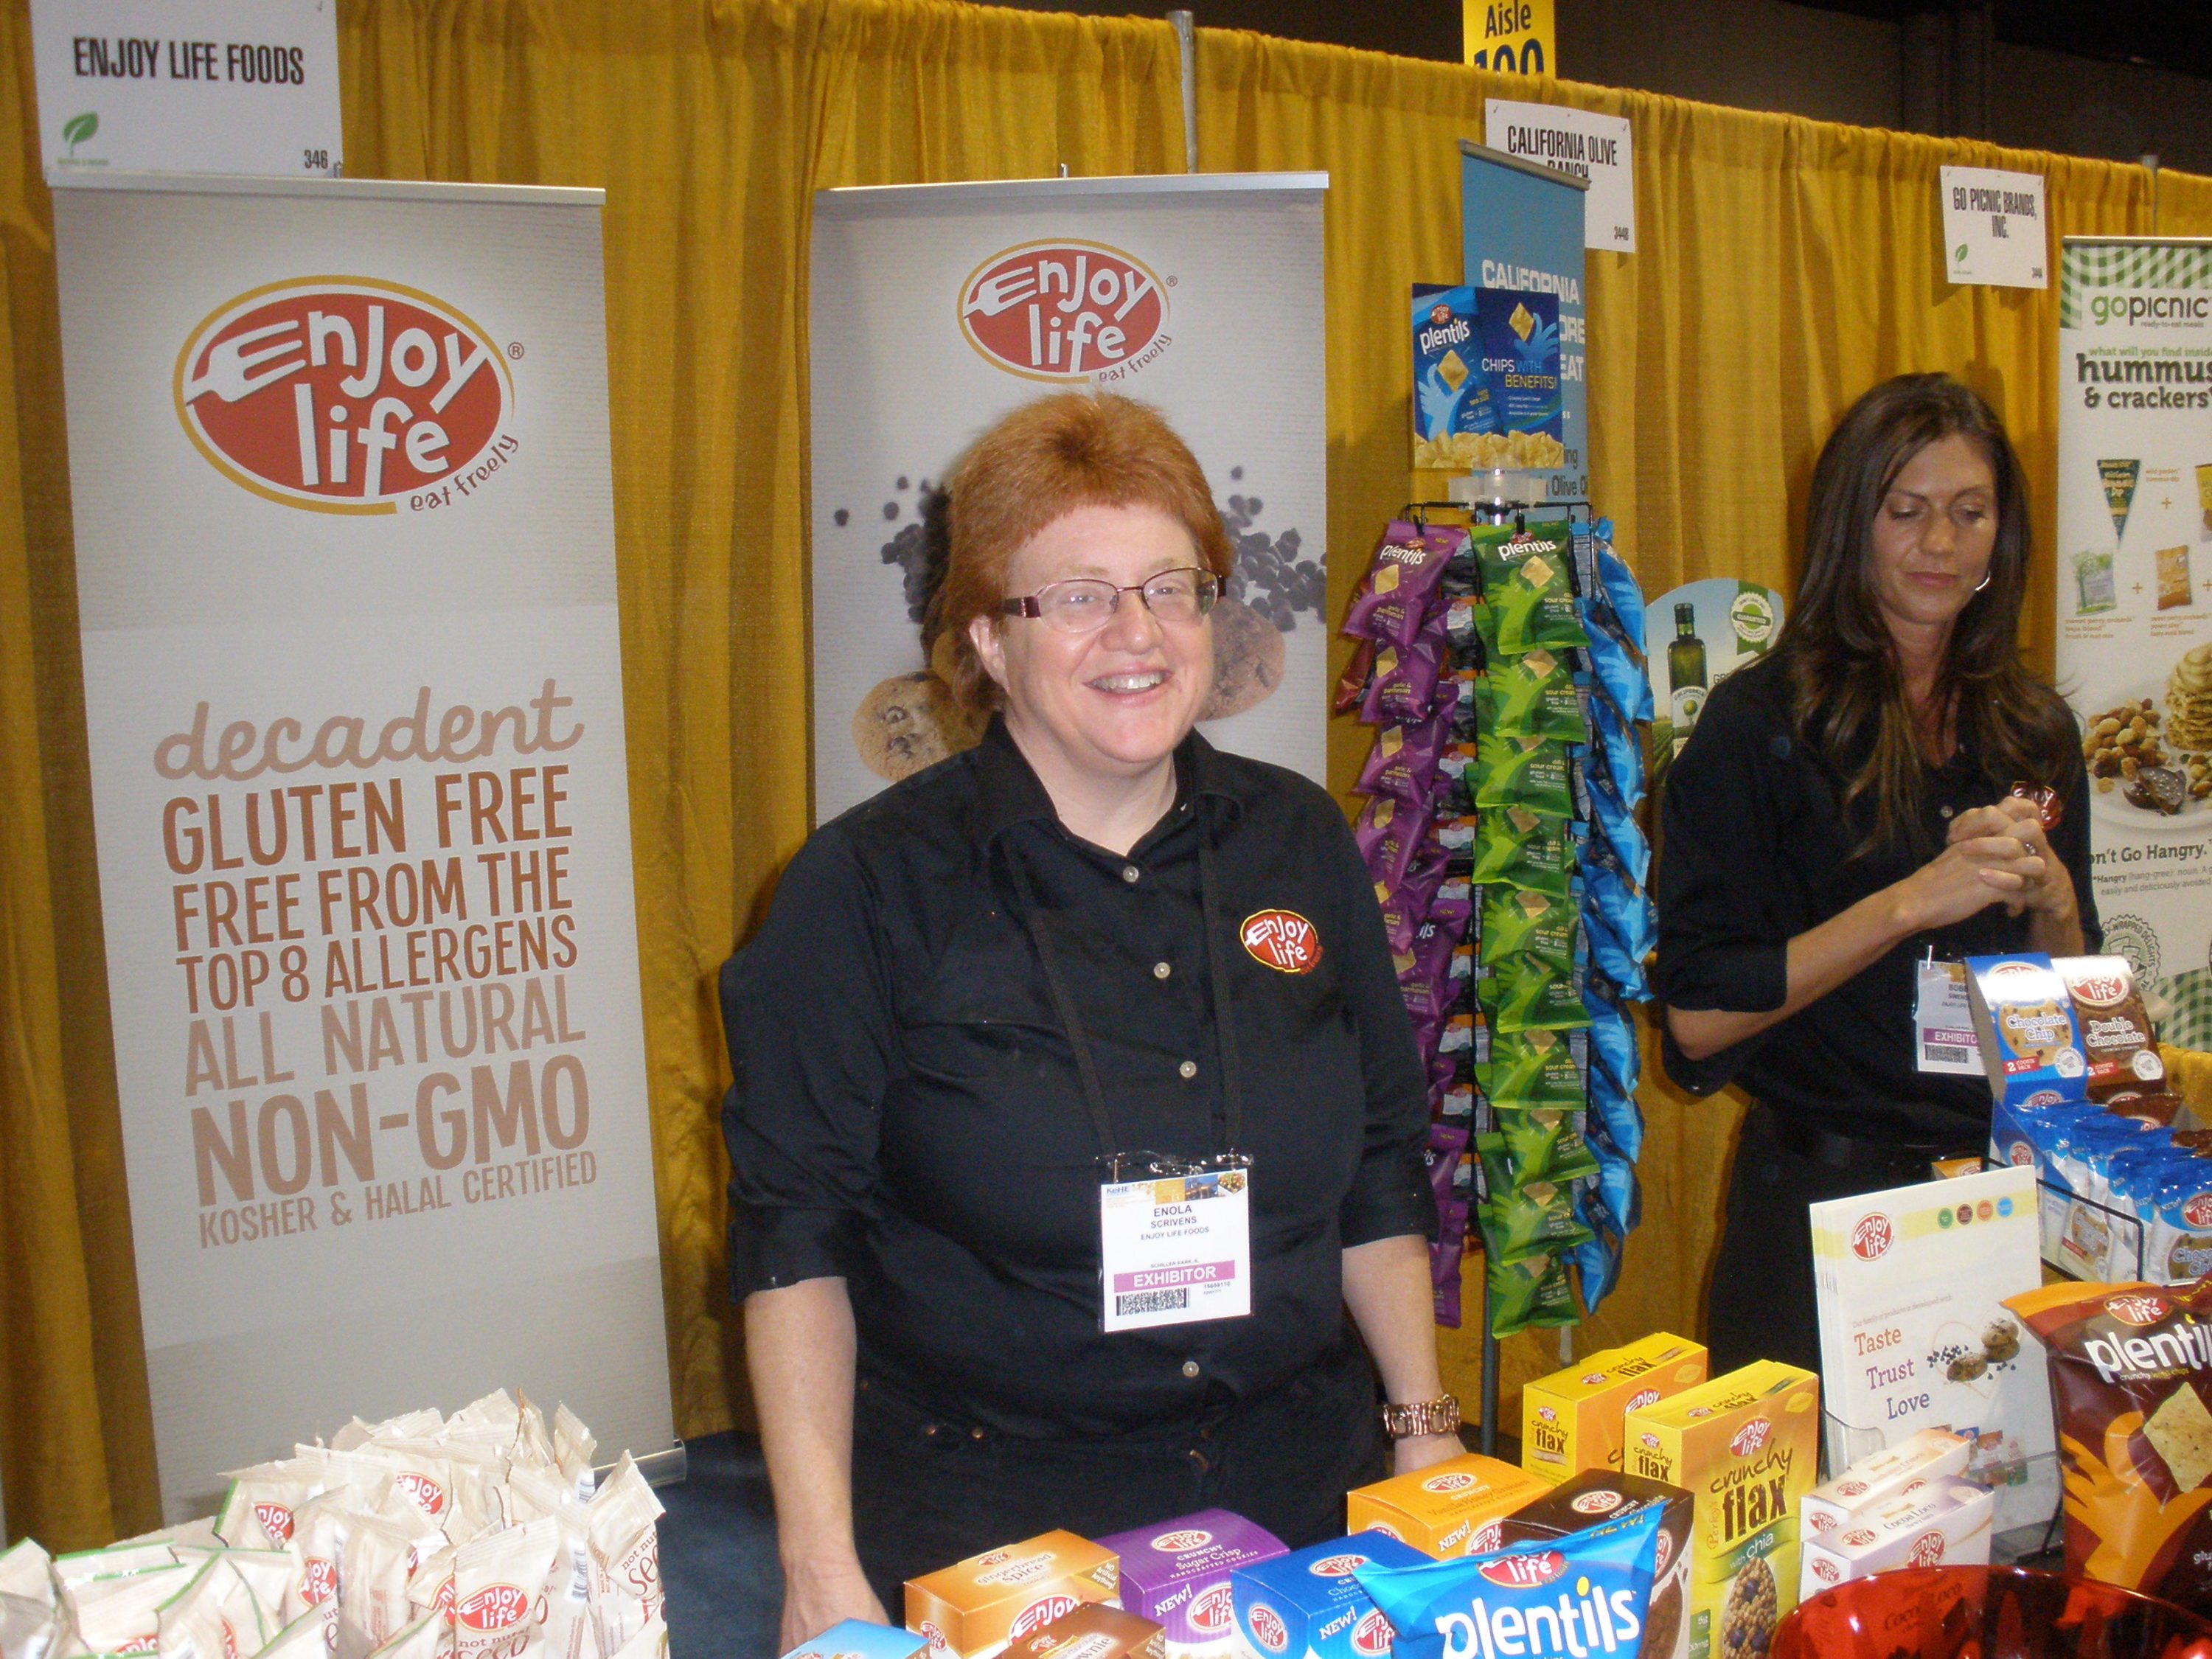 An Enjoy Life staff member at their booth.